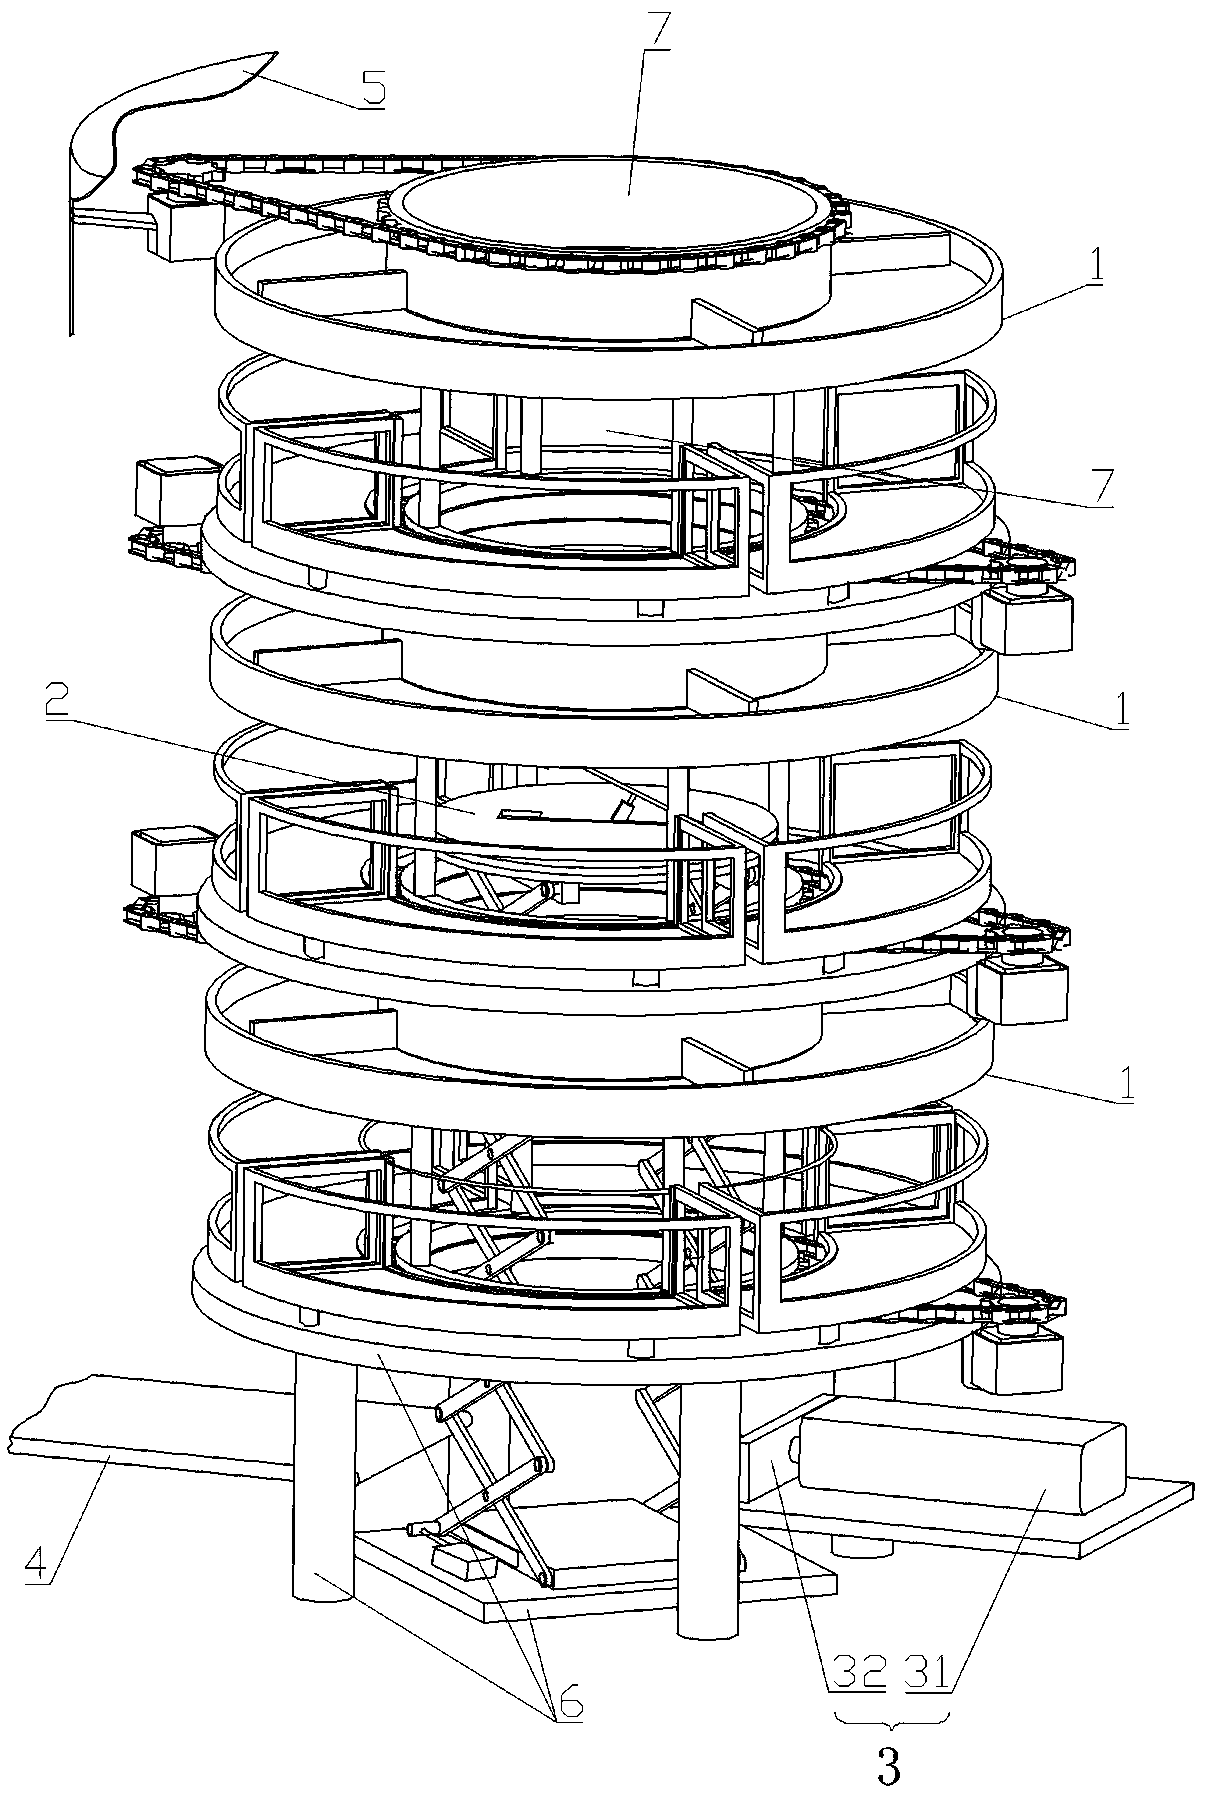 Multi-level stacking combined package sorting-packing-conveying device